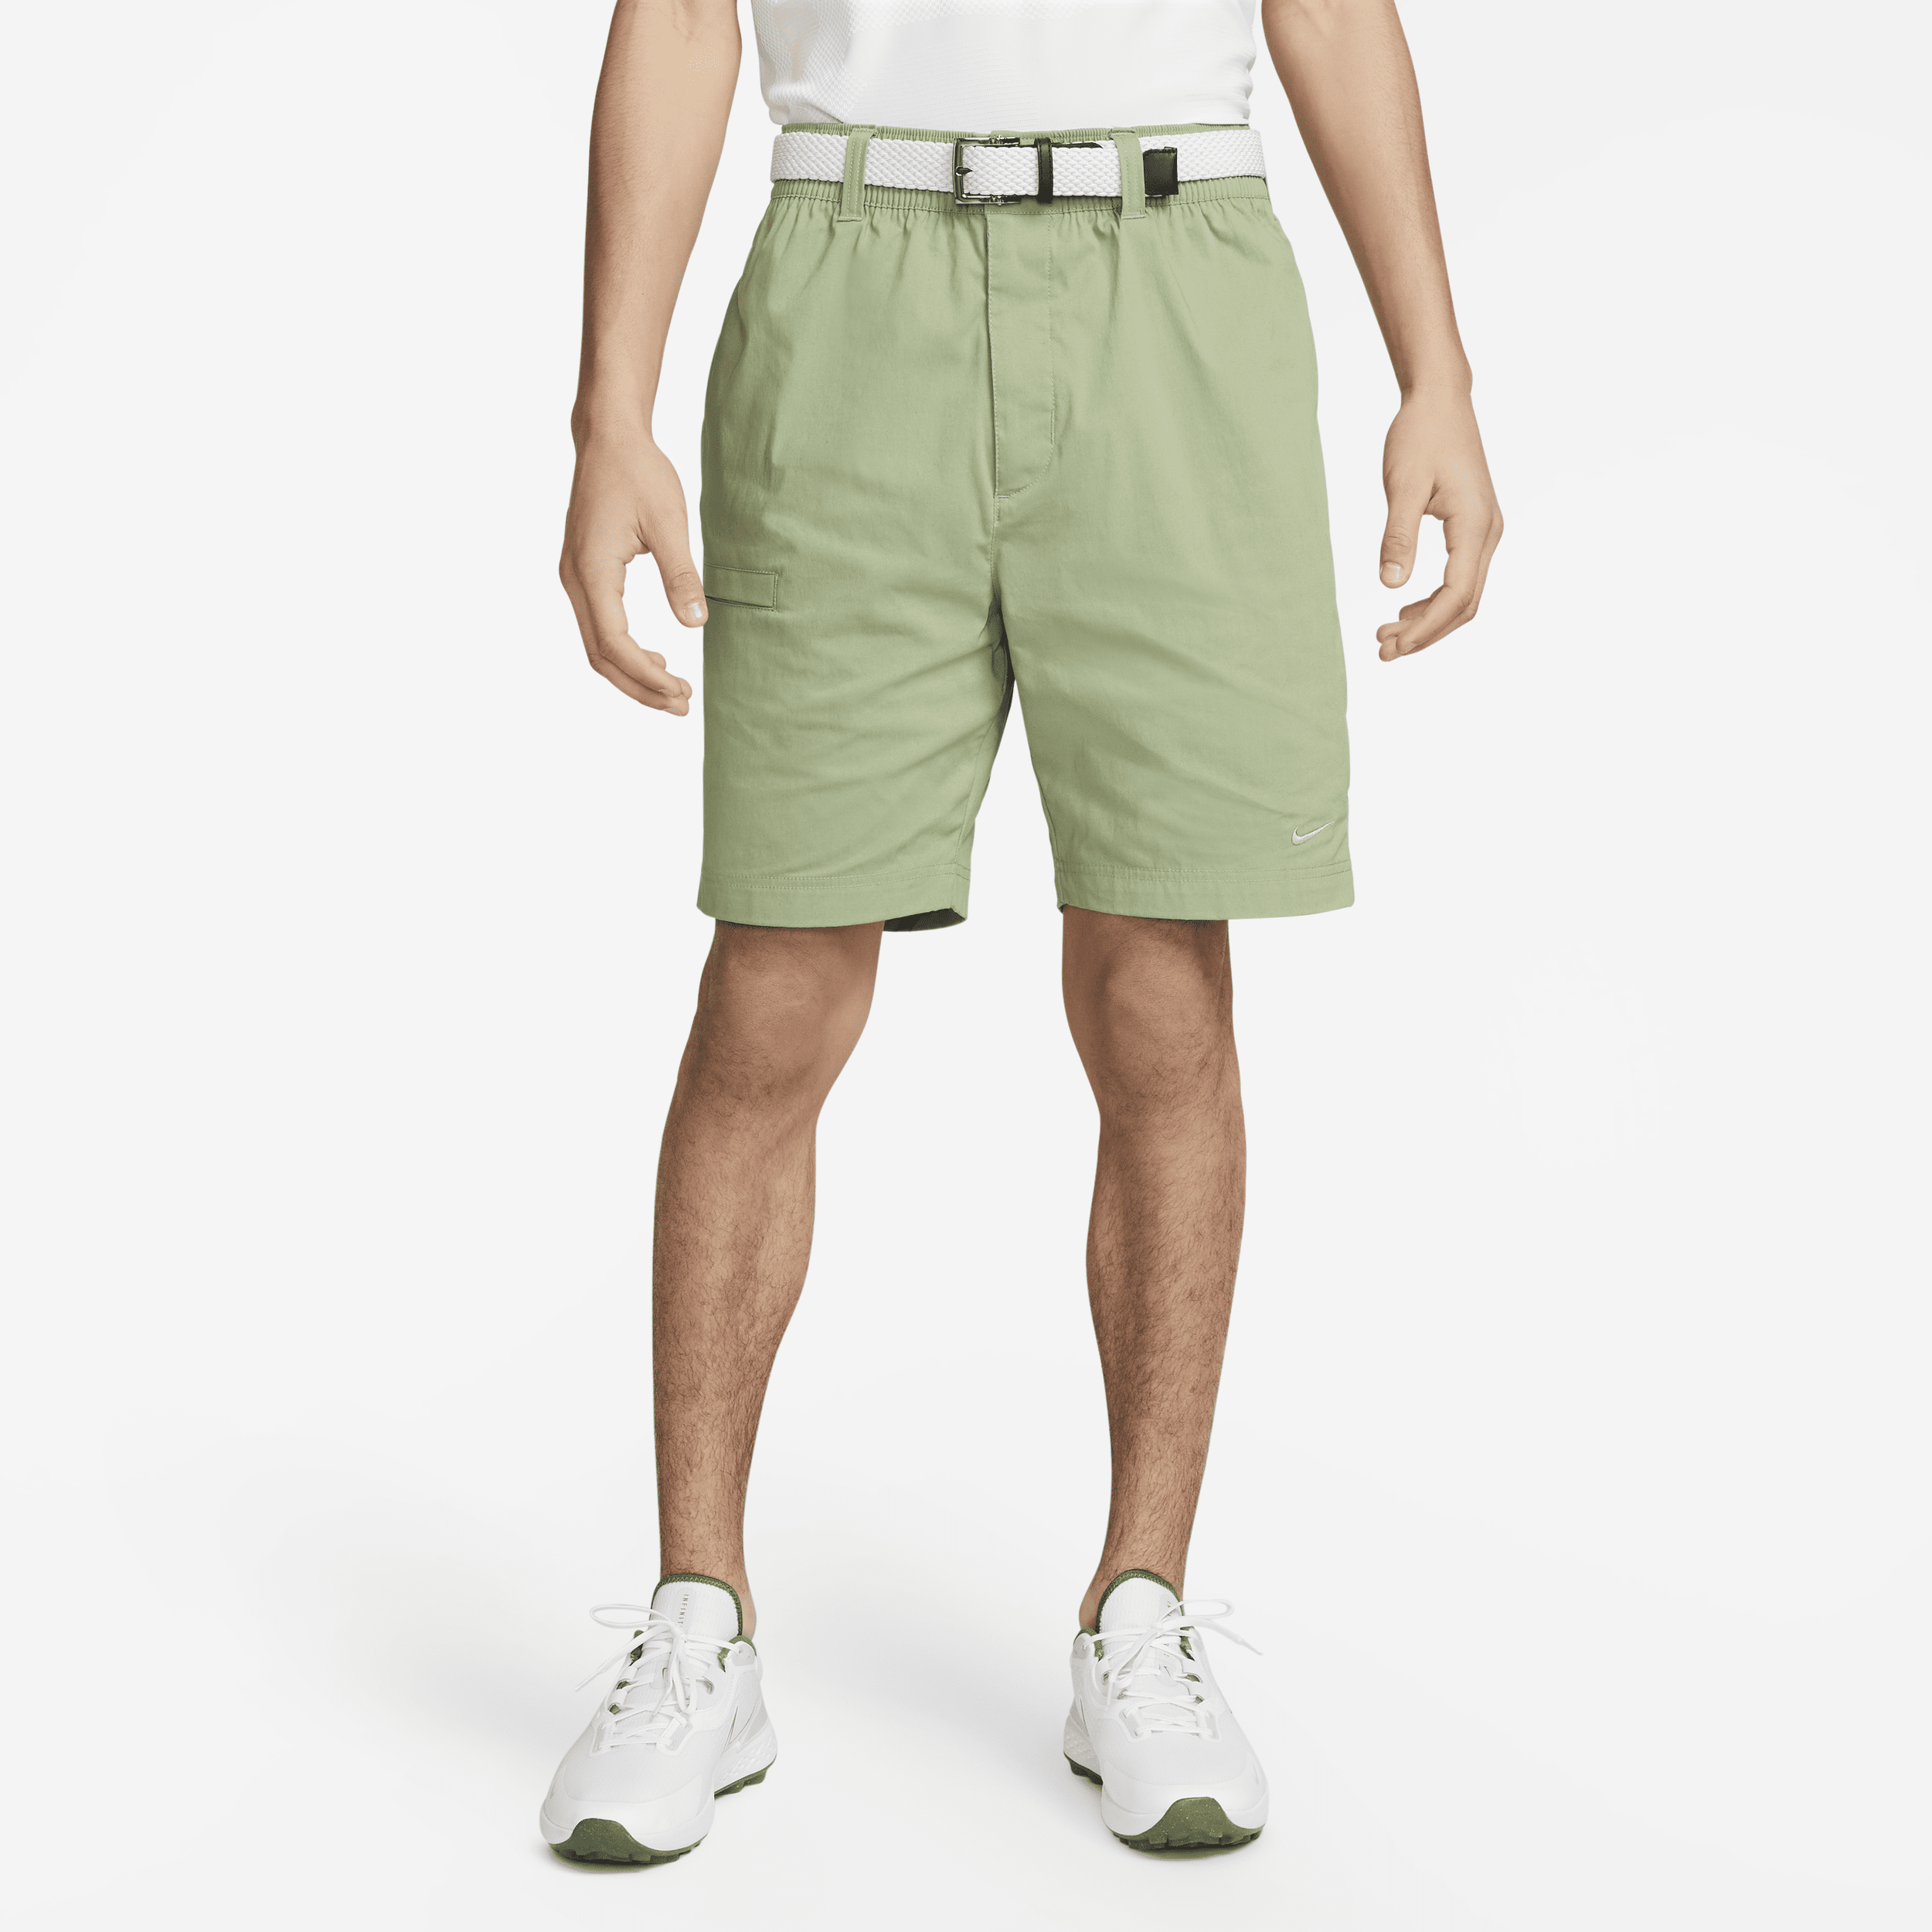 NIKE MEN'S UNSCRIPTED GOLF SHORTS,1009715807